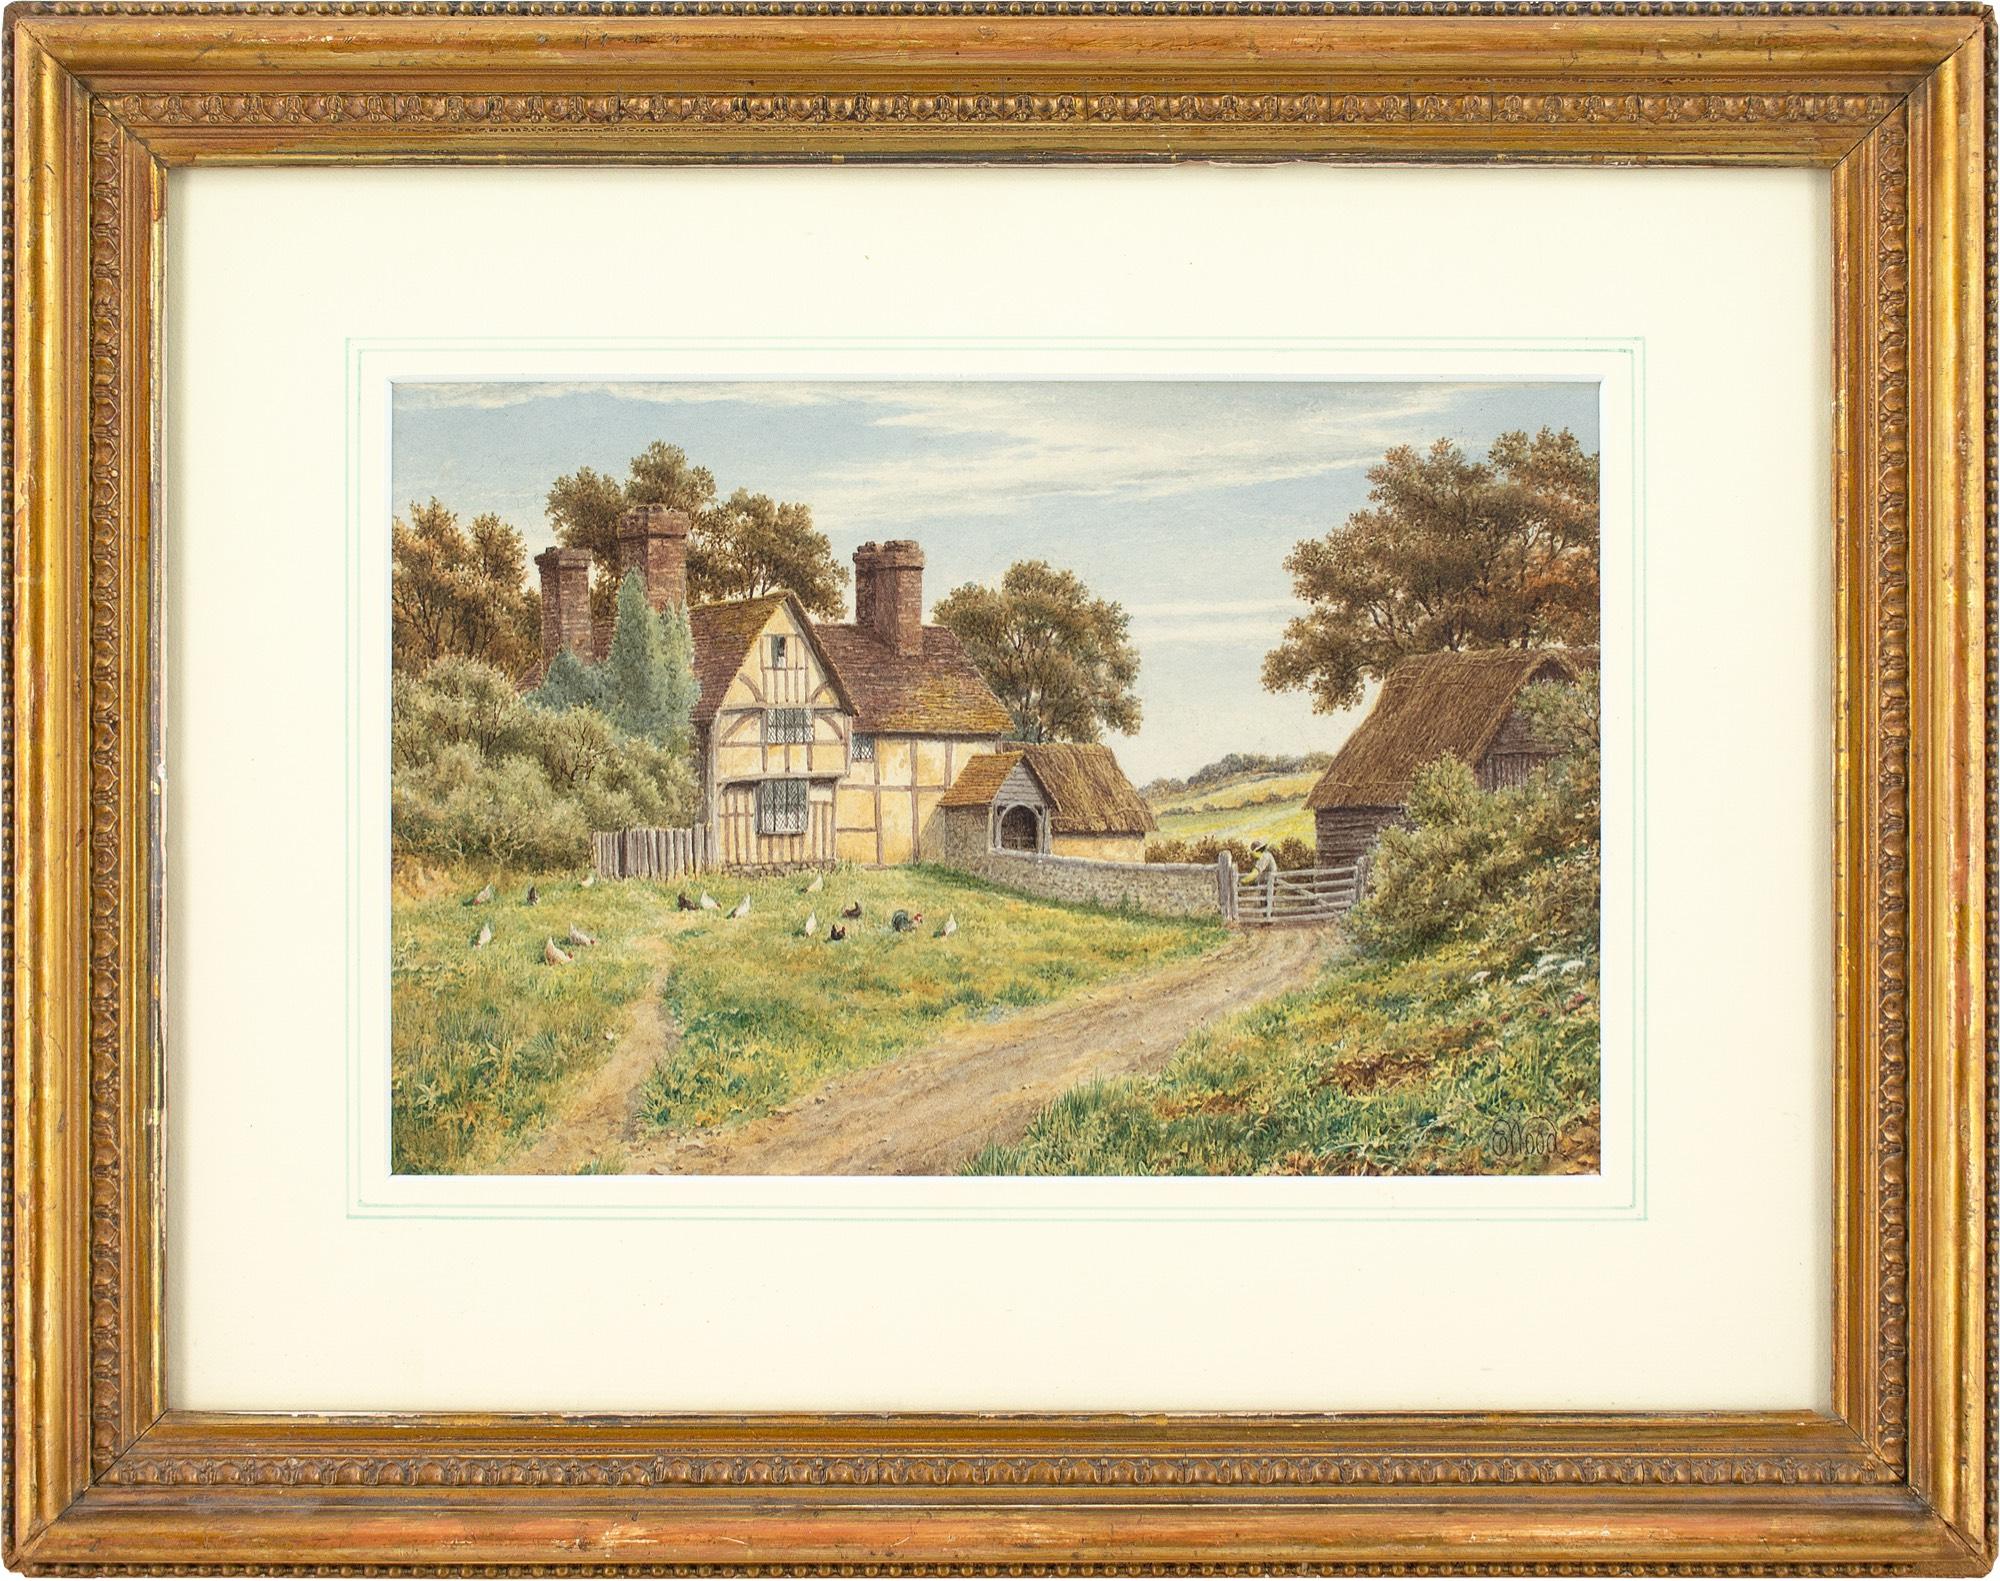 This charming late 19th-century watercolour by British artist E Wood depicts a beautiful 15th/16th century farmhouse near Godalming in Surrey, England.

As chickens rummage for food amid the verdant grass, sunlight illuminates the splendid